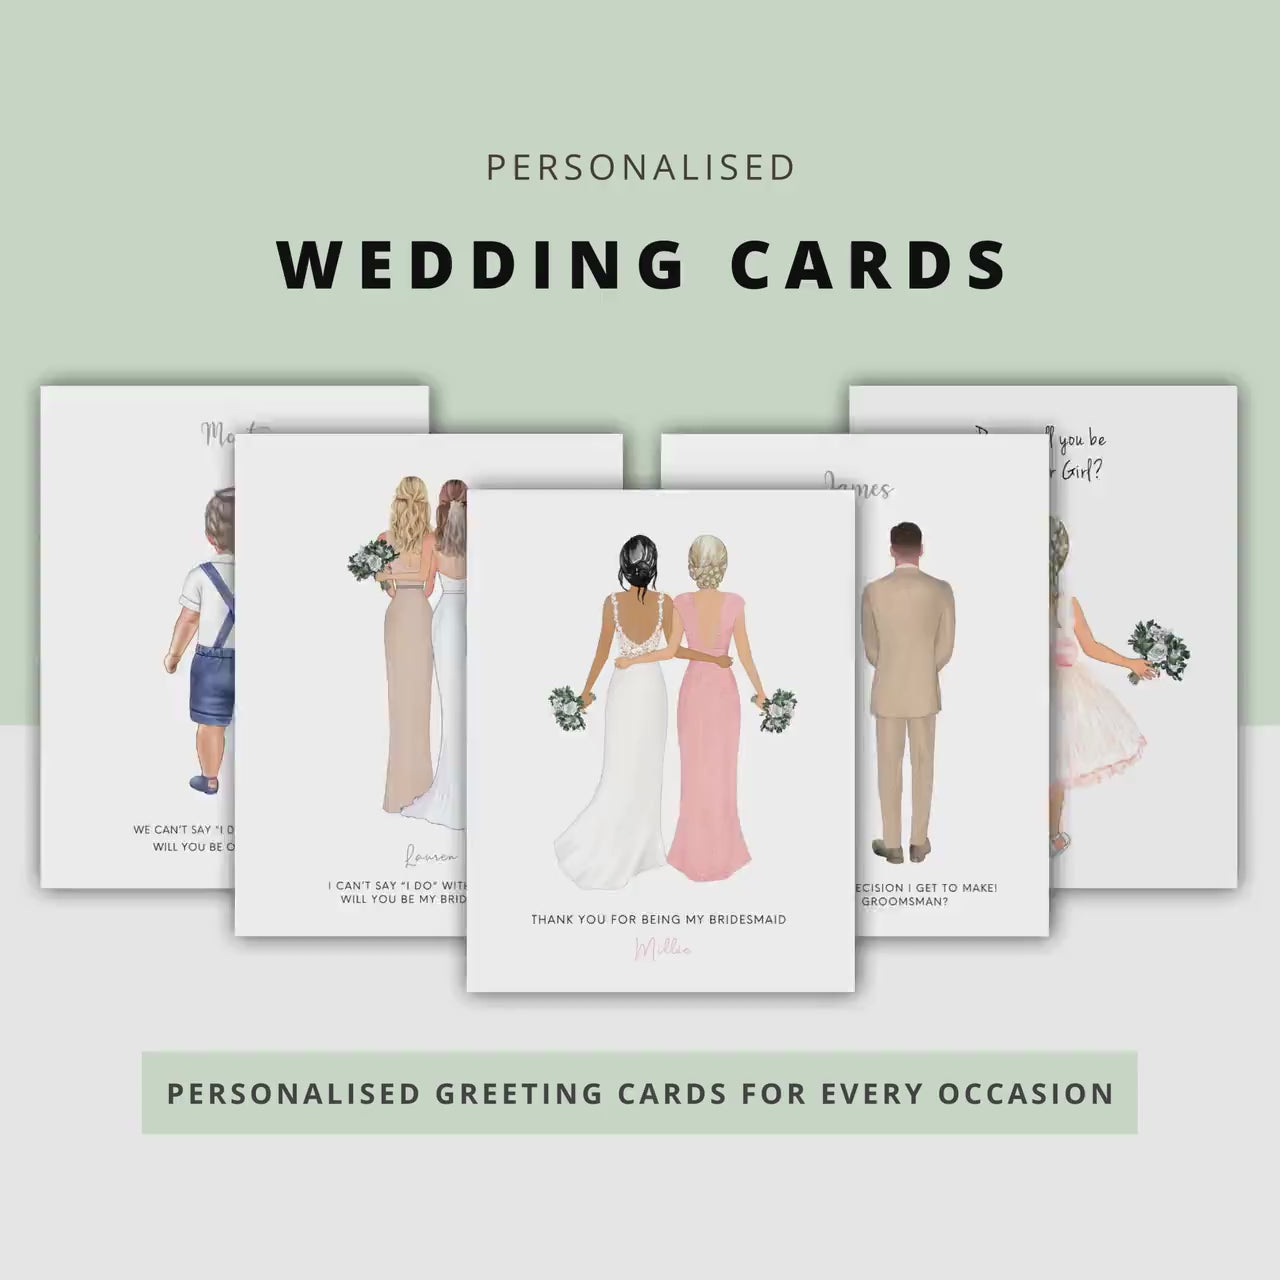 Personalised Will You Be My Bridesman Card, Bridesman Proposal, Proposal Card, Man of Honour Card, Bridesman Box, Bridesman Thank You